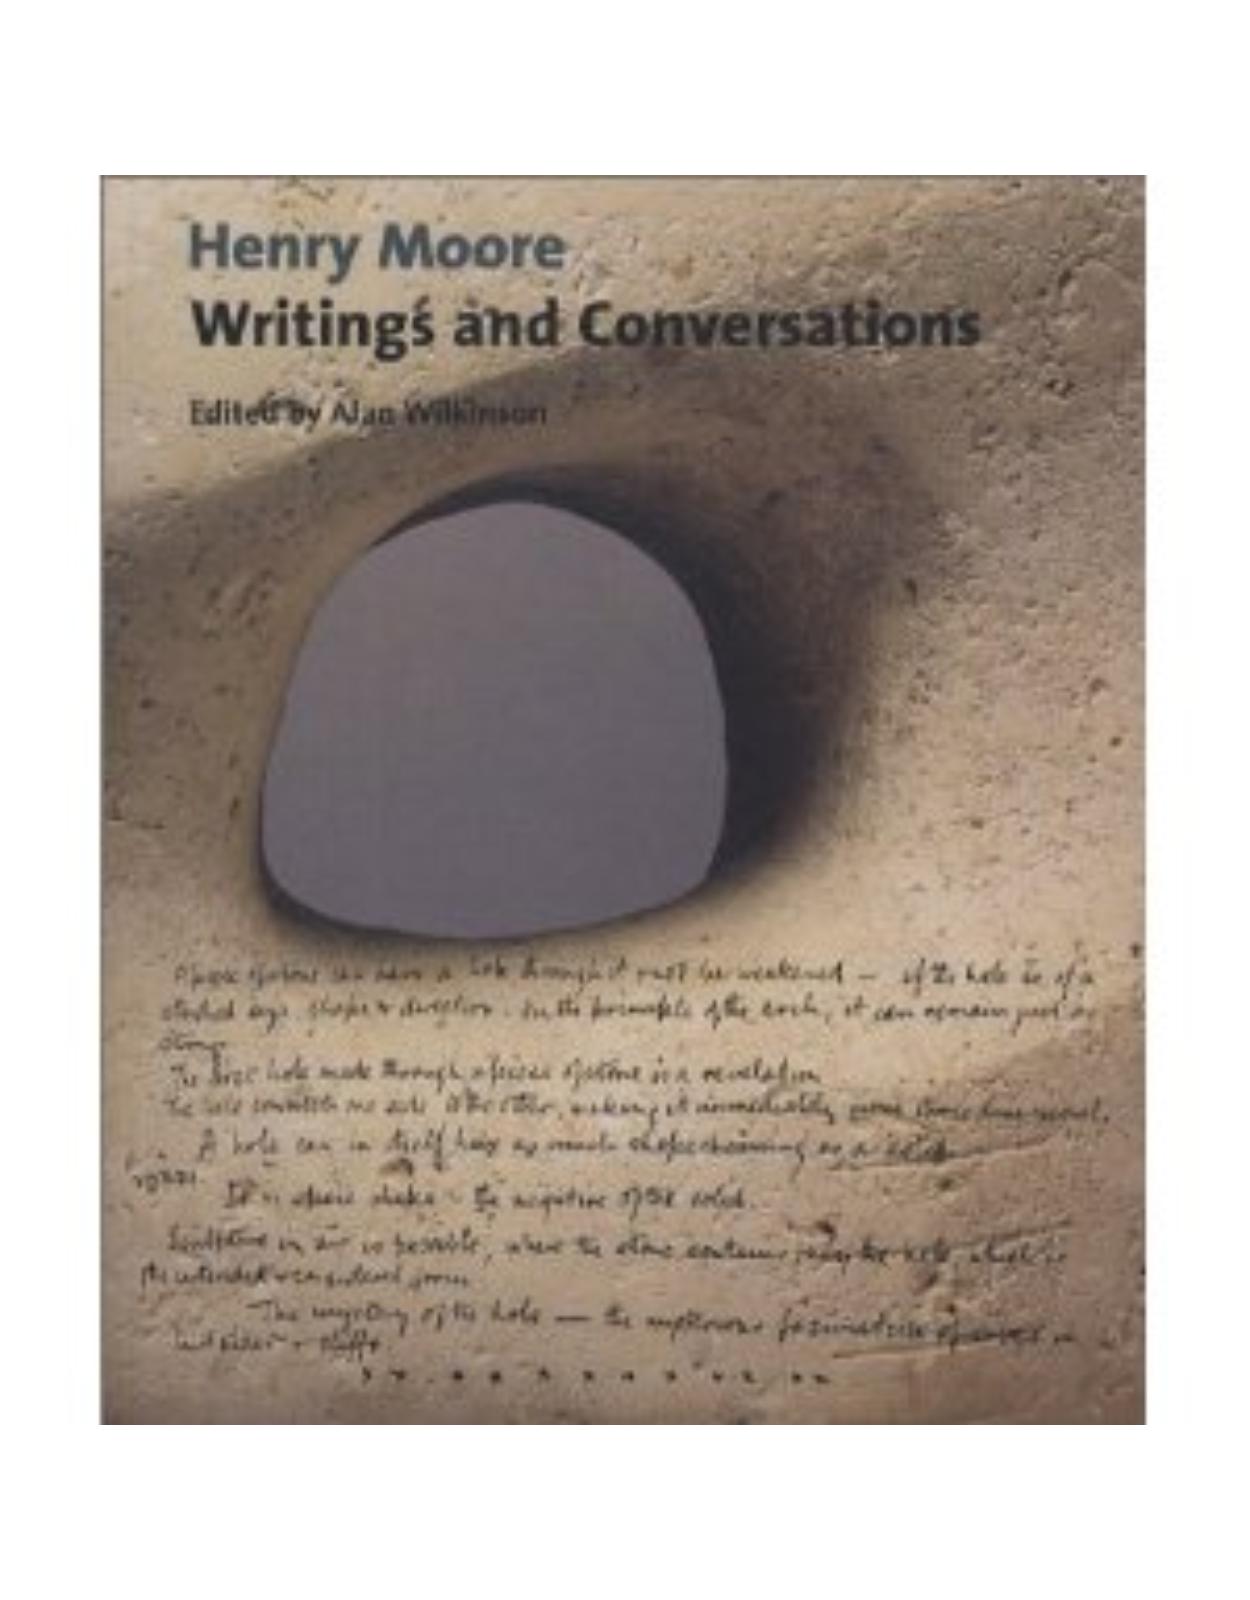 Henry Moore: Writings and Conversations